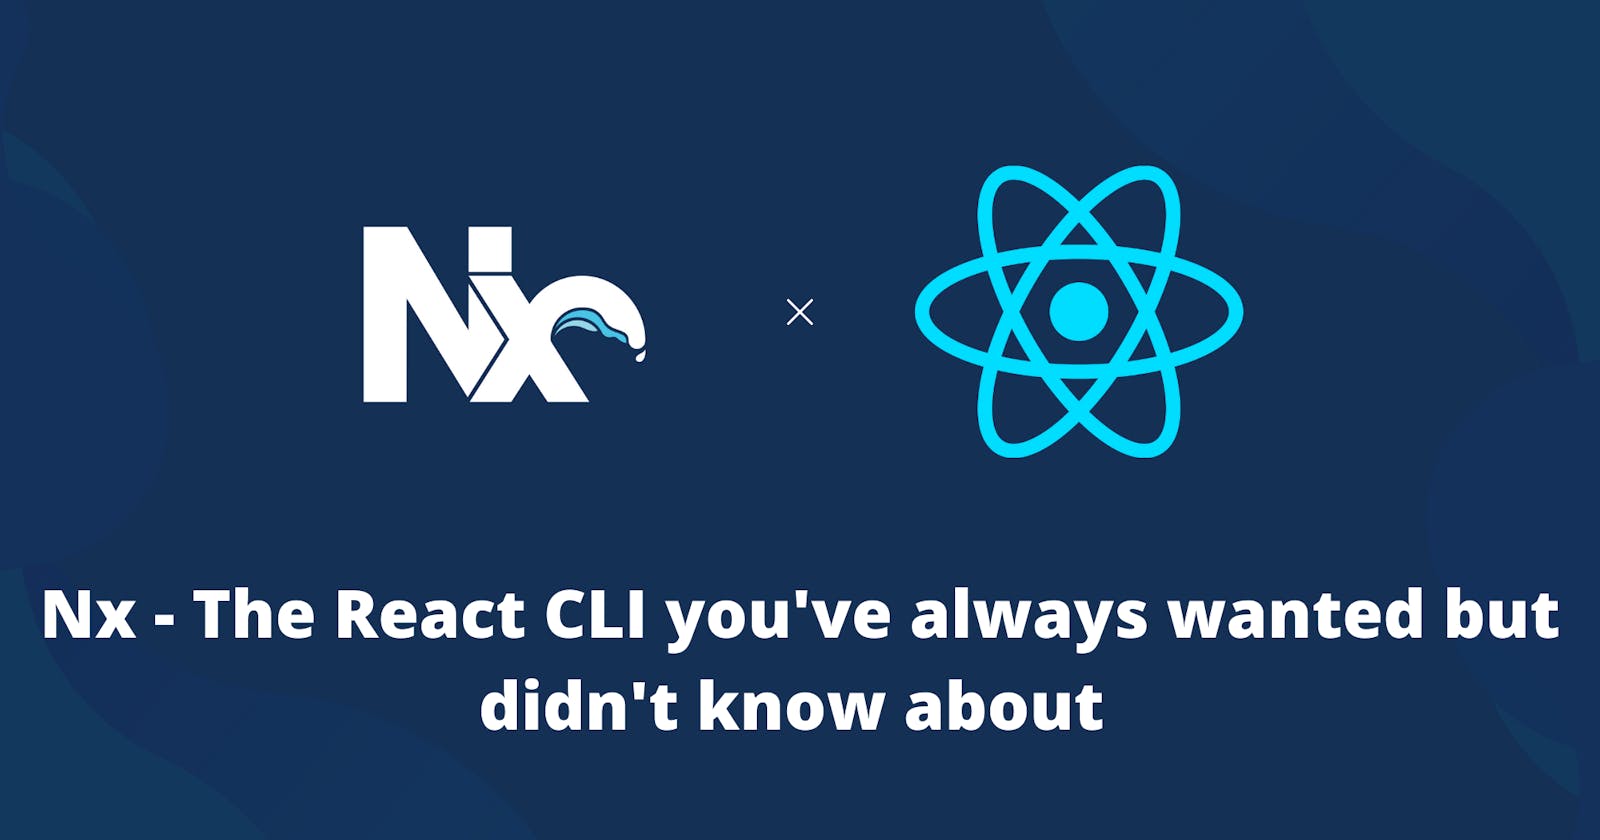 The React CLI you always wanted but didn’t know about